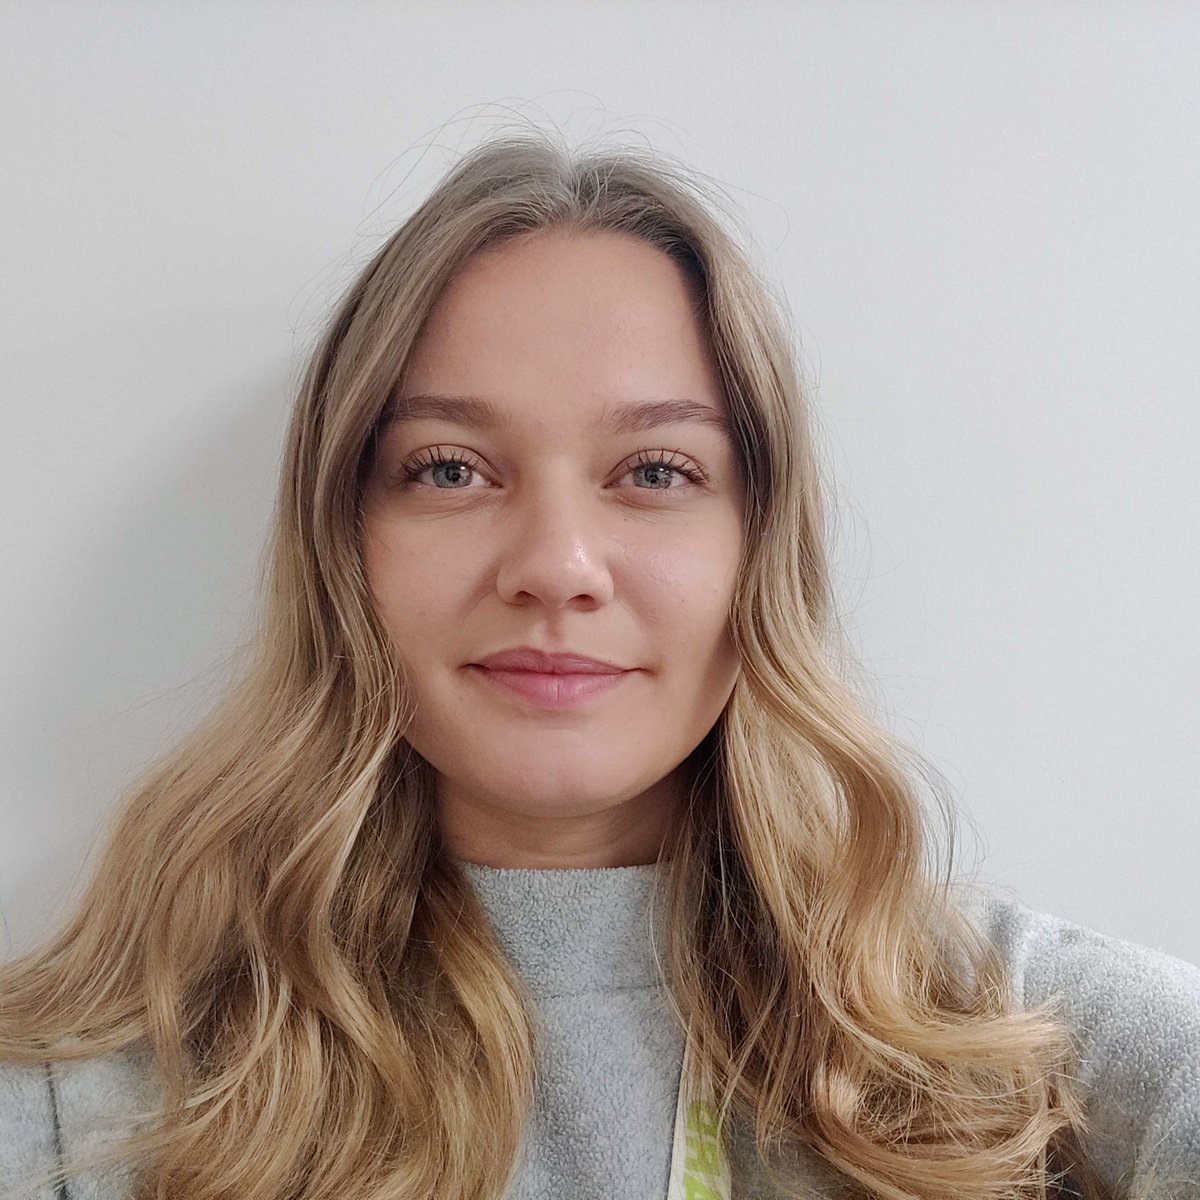 As part of National Apprenticeship Week 2022, we caught up with our lovely HR Assistant, Chelsea, to find out more about what being an apprentice @WardRecycling is like and what she hopes to do next:
lnkd.in/eTVVQqGE

#Asktheapprentice #BuildtheFuture #naw2022